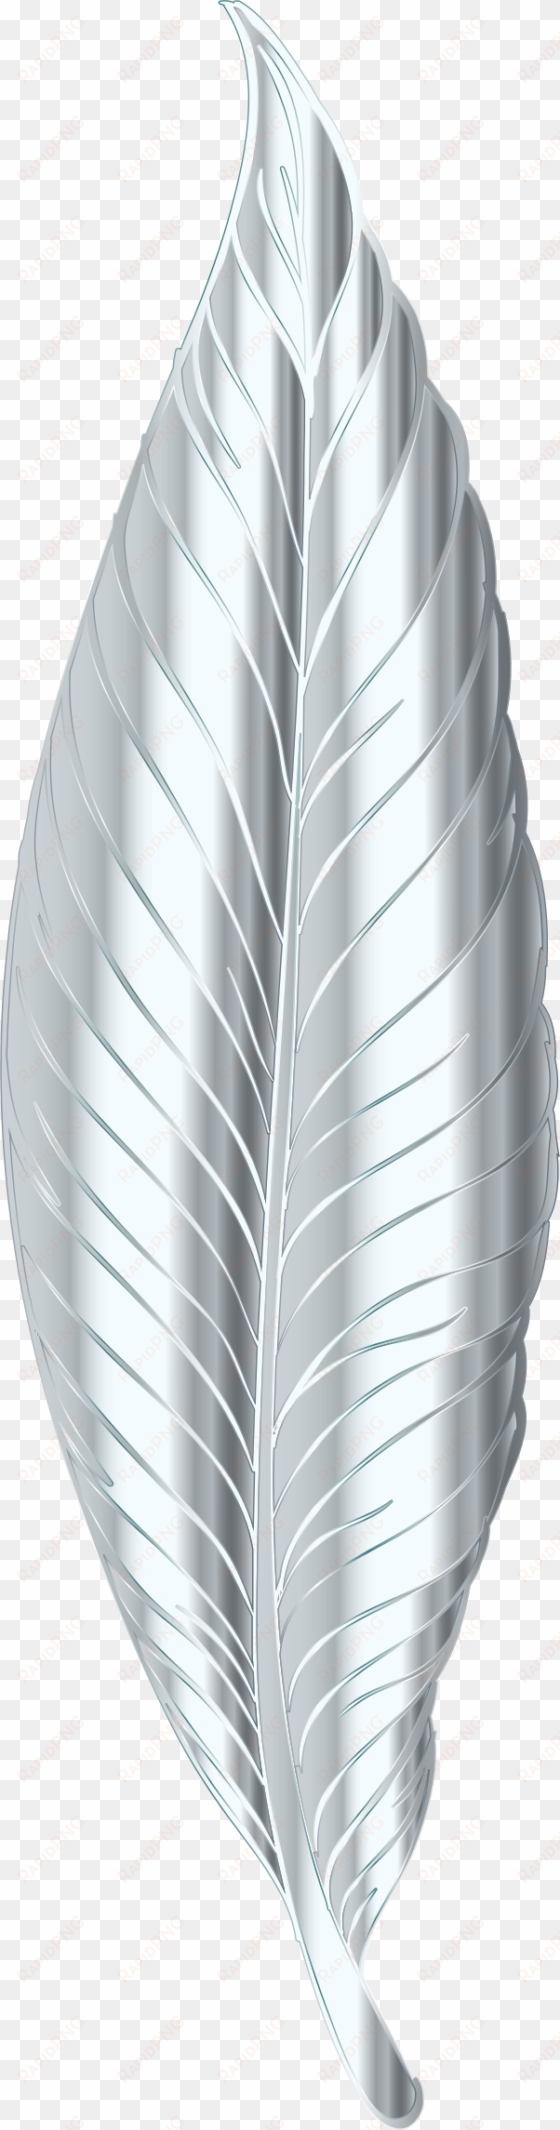 s - silver feather clip art